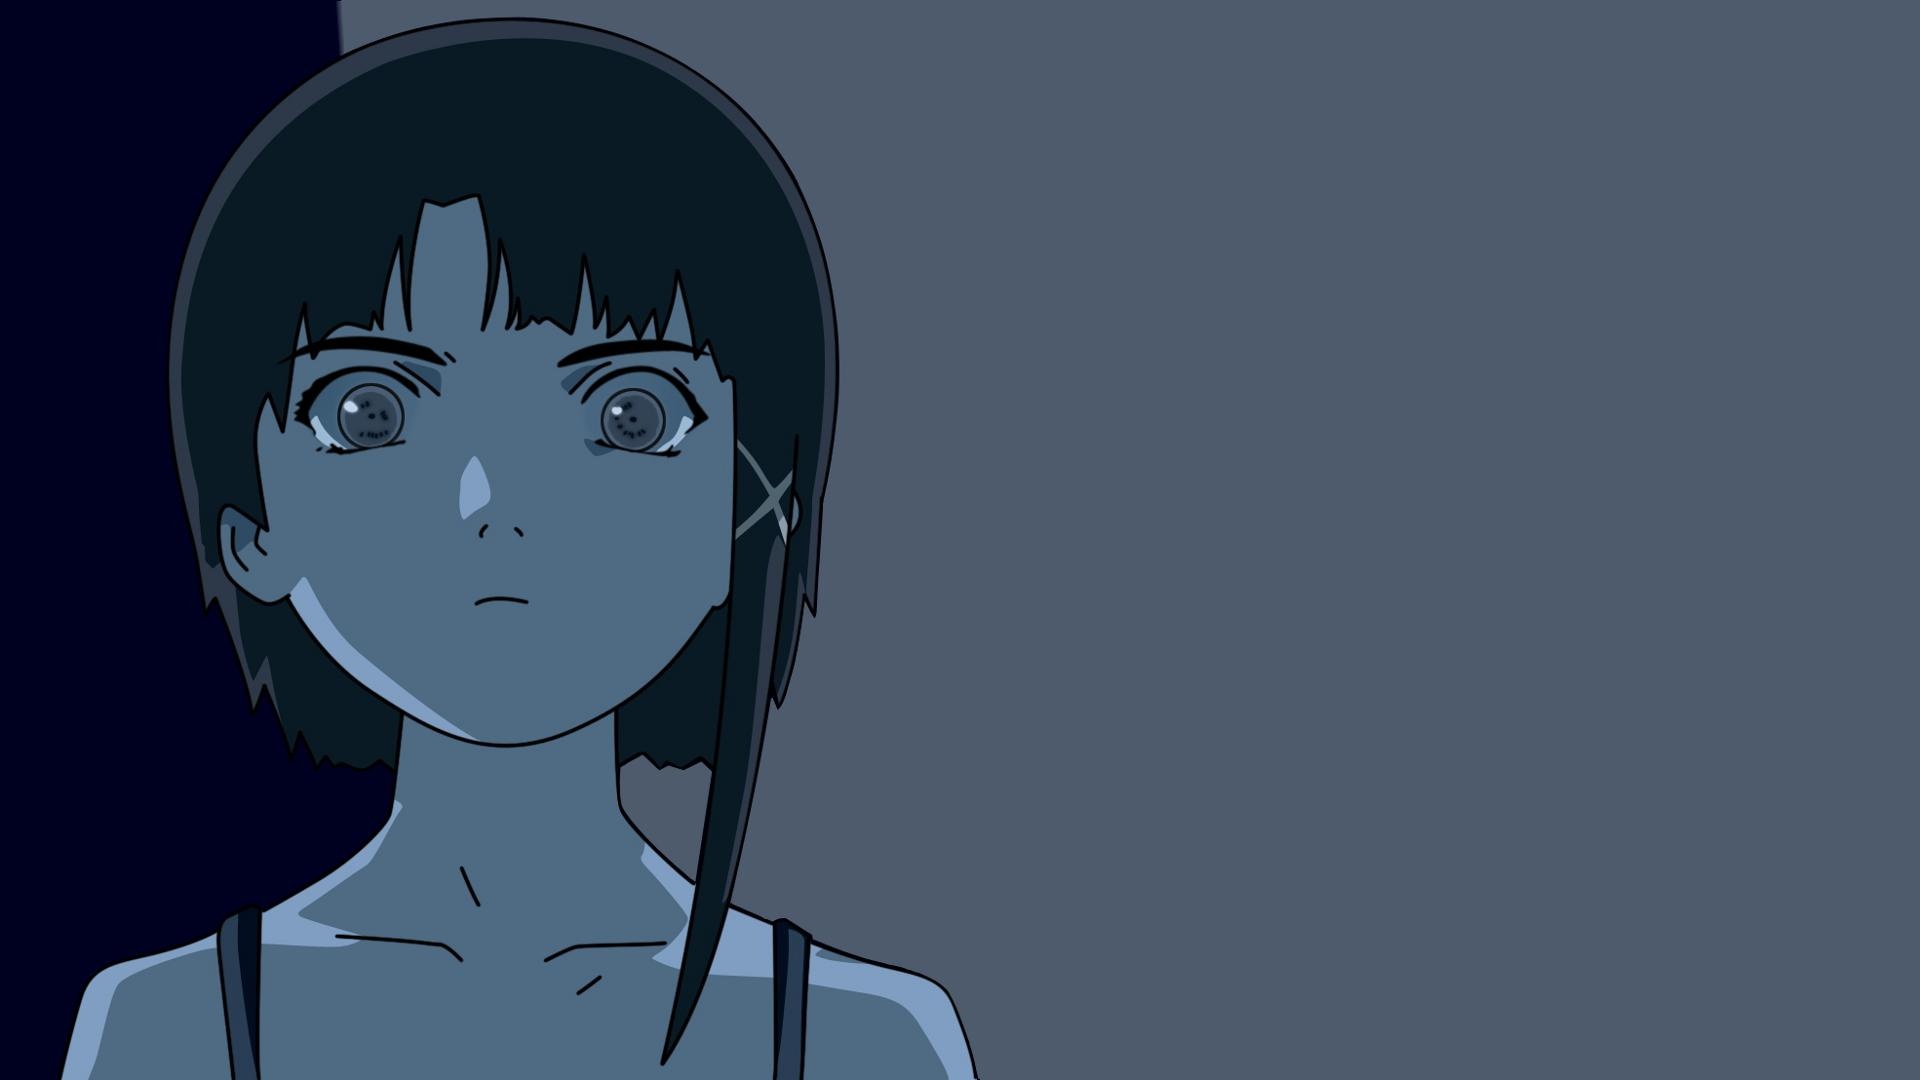 Serial Experiments Lain, Expanding wallpaper collection, Unique and rare artwork, 4chan archive, 1920x1080 Full HD Desktop